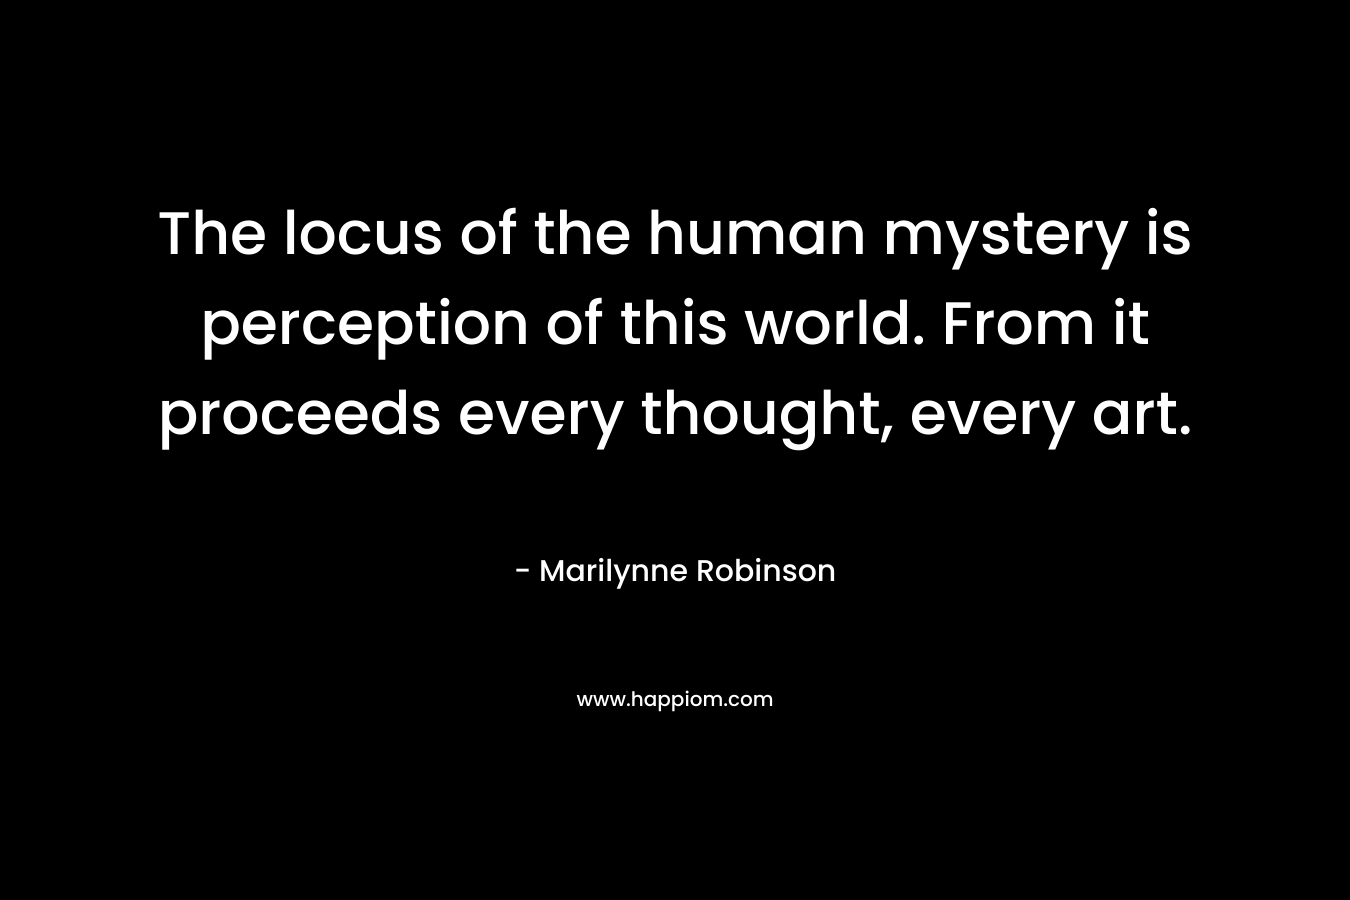 The locus of the human mystery is perception of this world. From it proceeds every thought, every art. – Marilynne Robinson